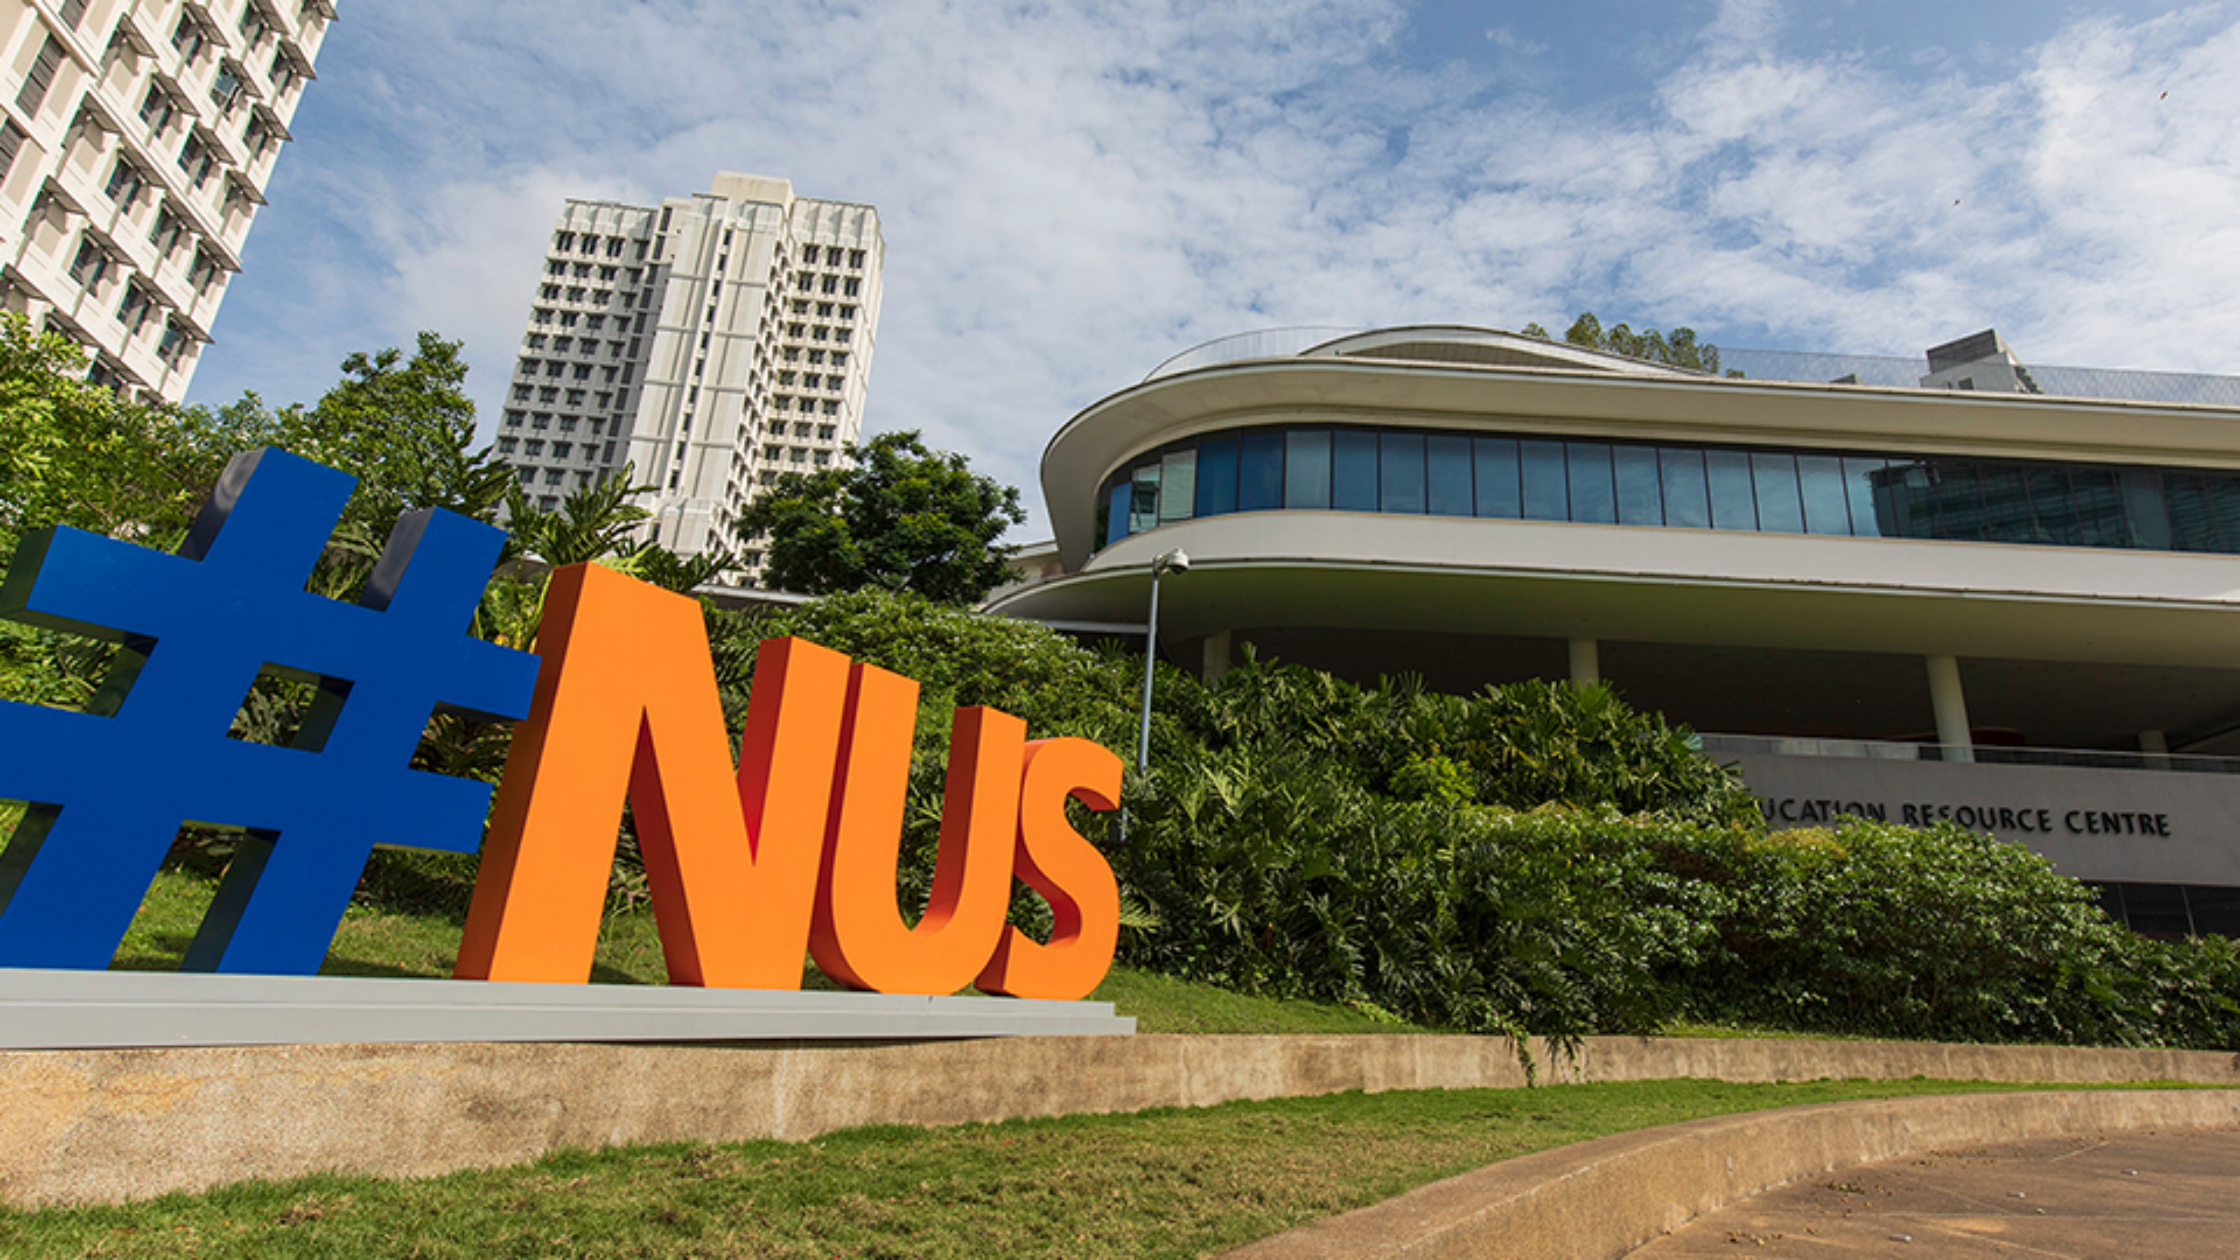 The Ultimate Guide to Entering NUS - All You Need To Know